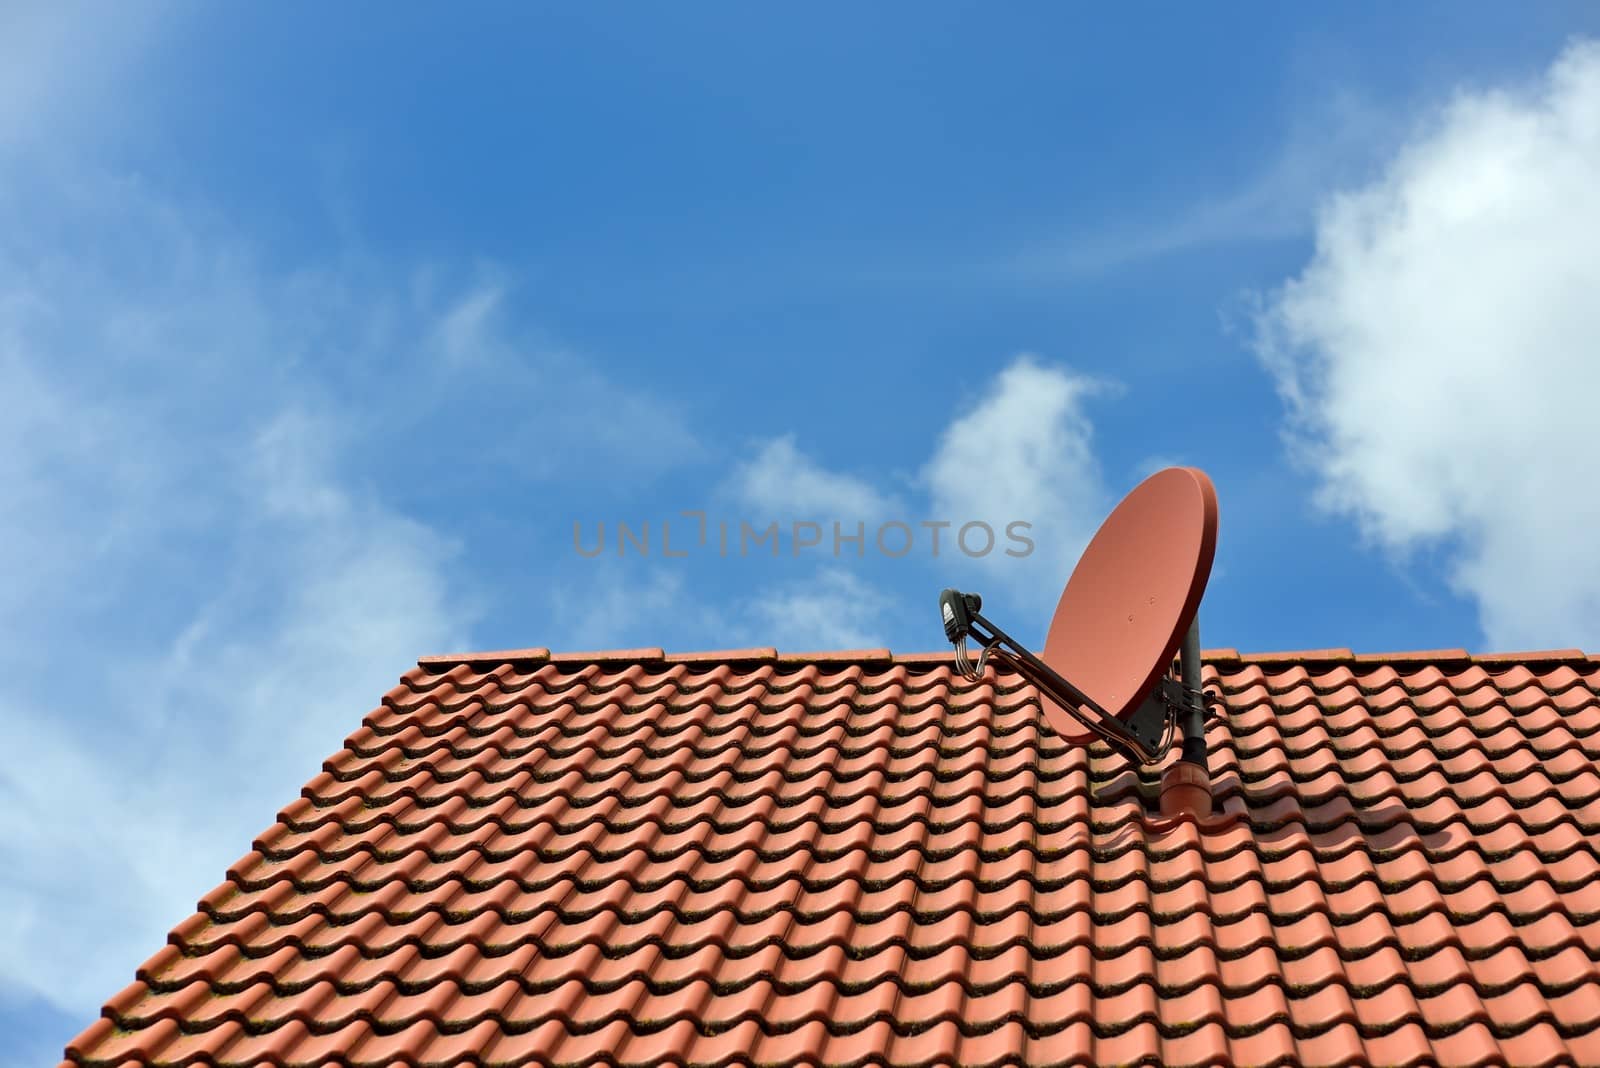 A satellite dish on a house roof